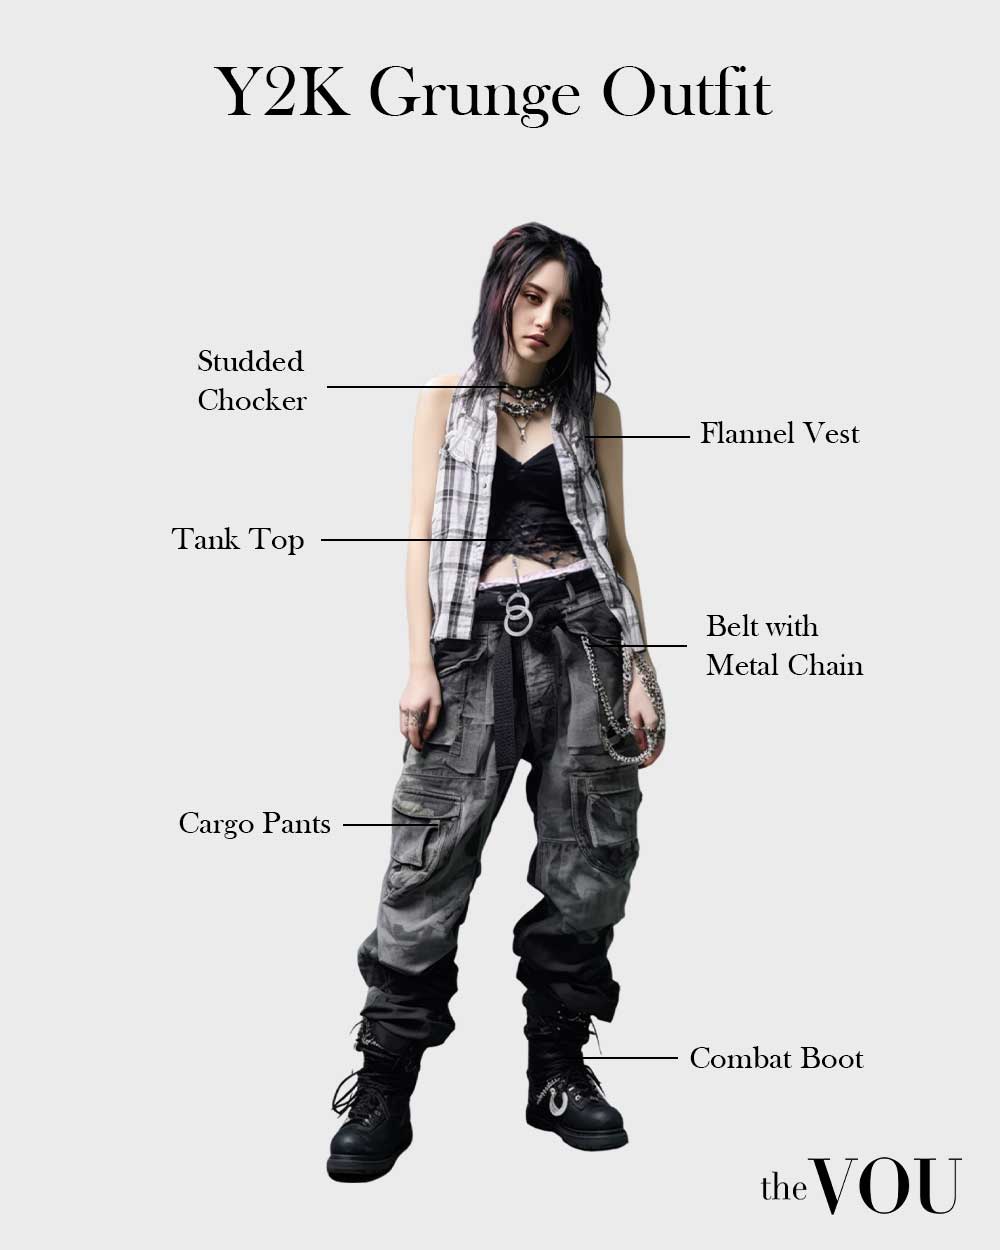 Y2K Grunge Style outfit for women